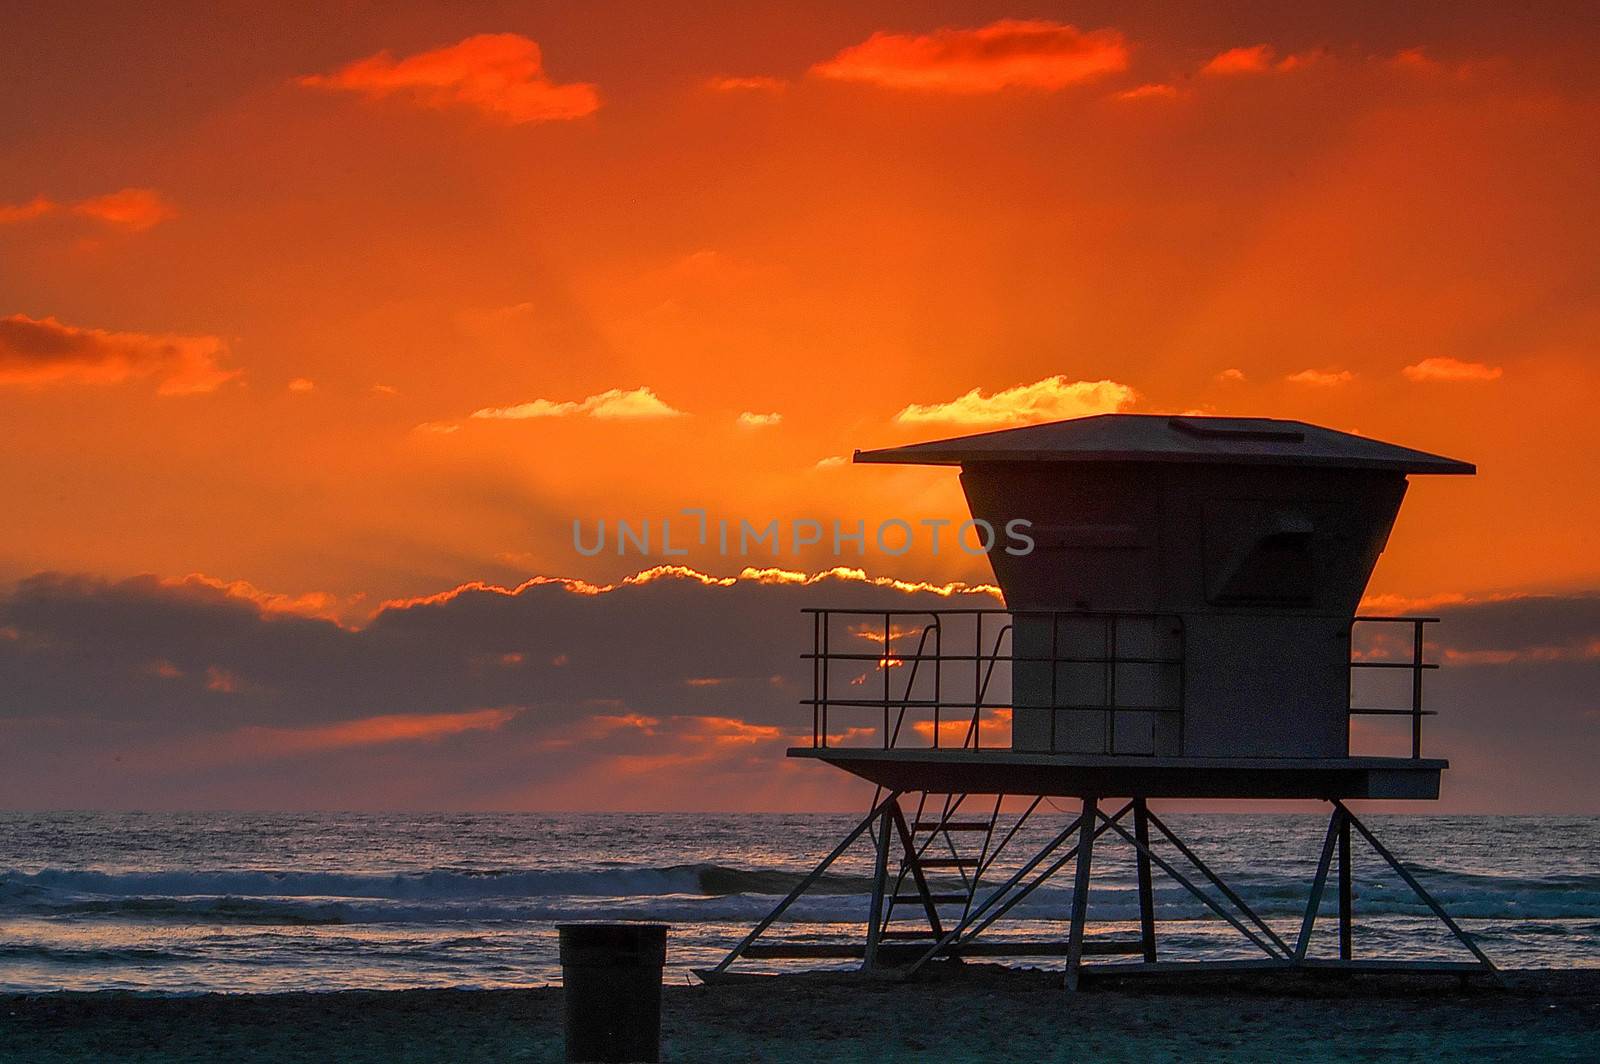 Solana Beach Sunset with Lifeguard Tower by cestes001